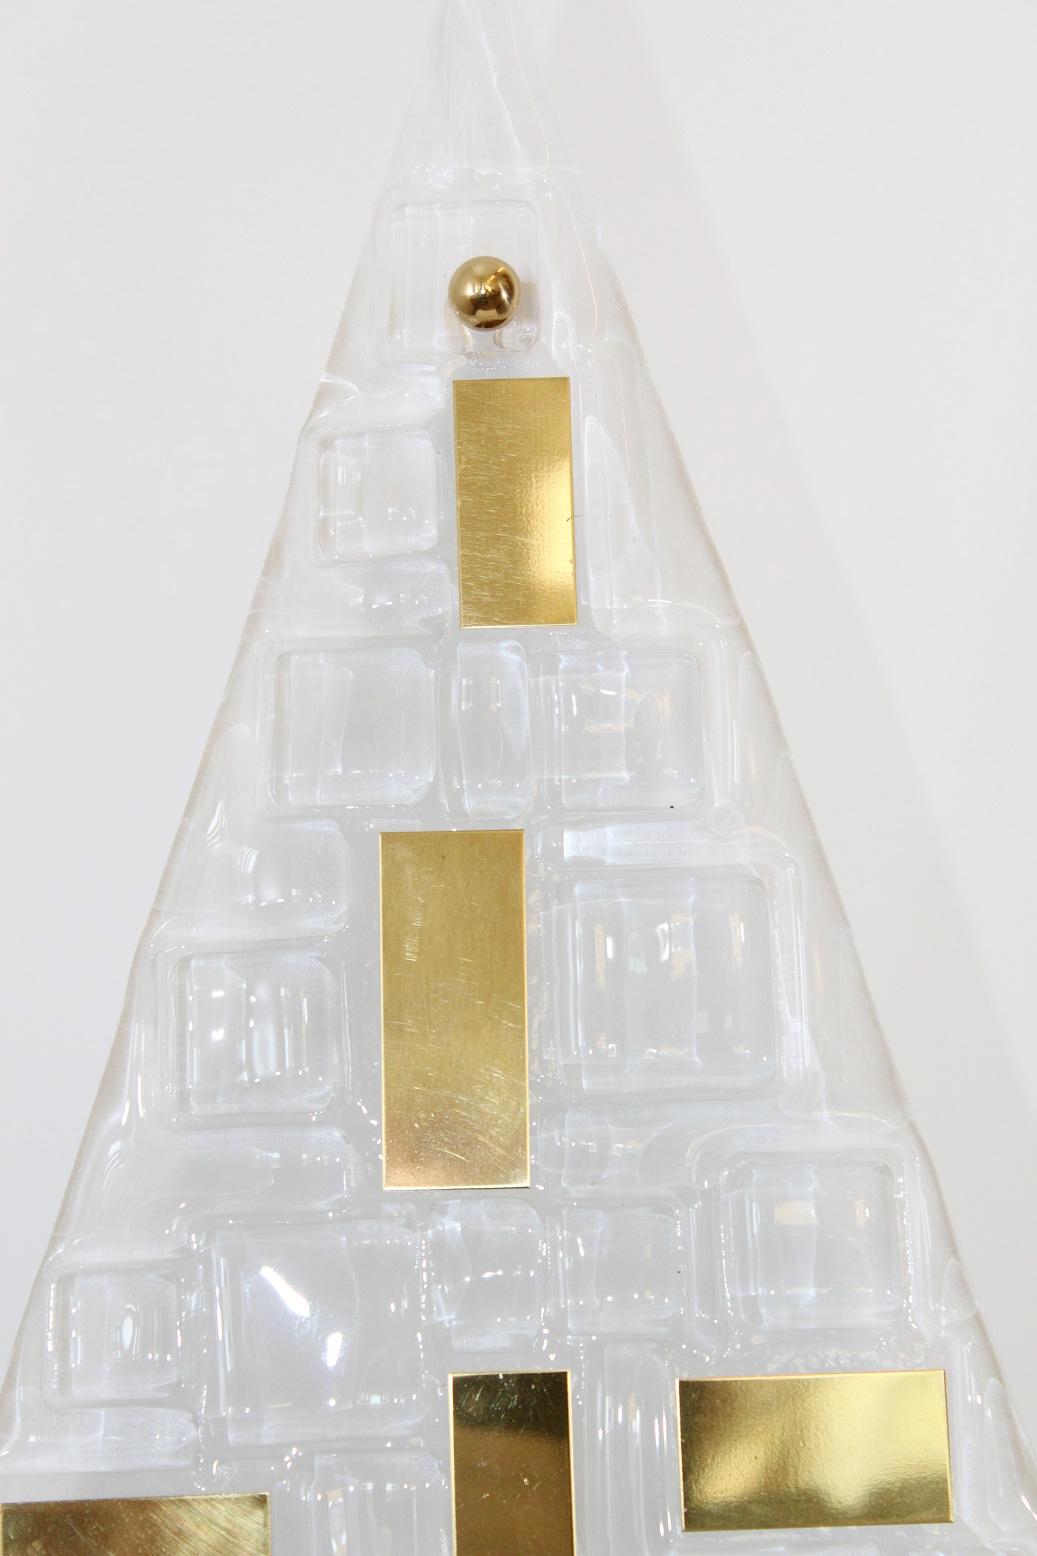 Limited edition Italian modern wall light with frosted triangular textured Murano glass decorated with brass details, mounted on polished brass metal finish frame / Exclusively designed by Gianluca Fontana for Fabio Ltd / Made in Italy
2 lights /